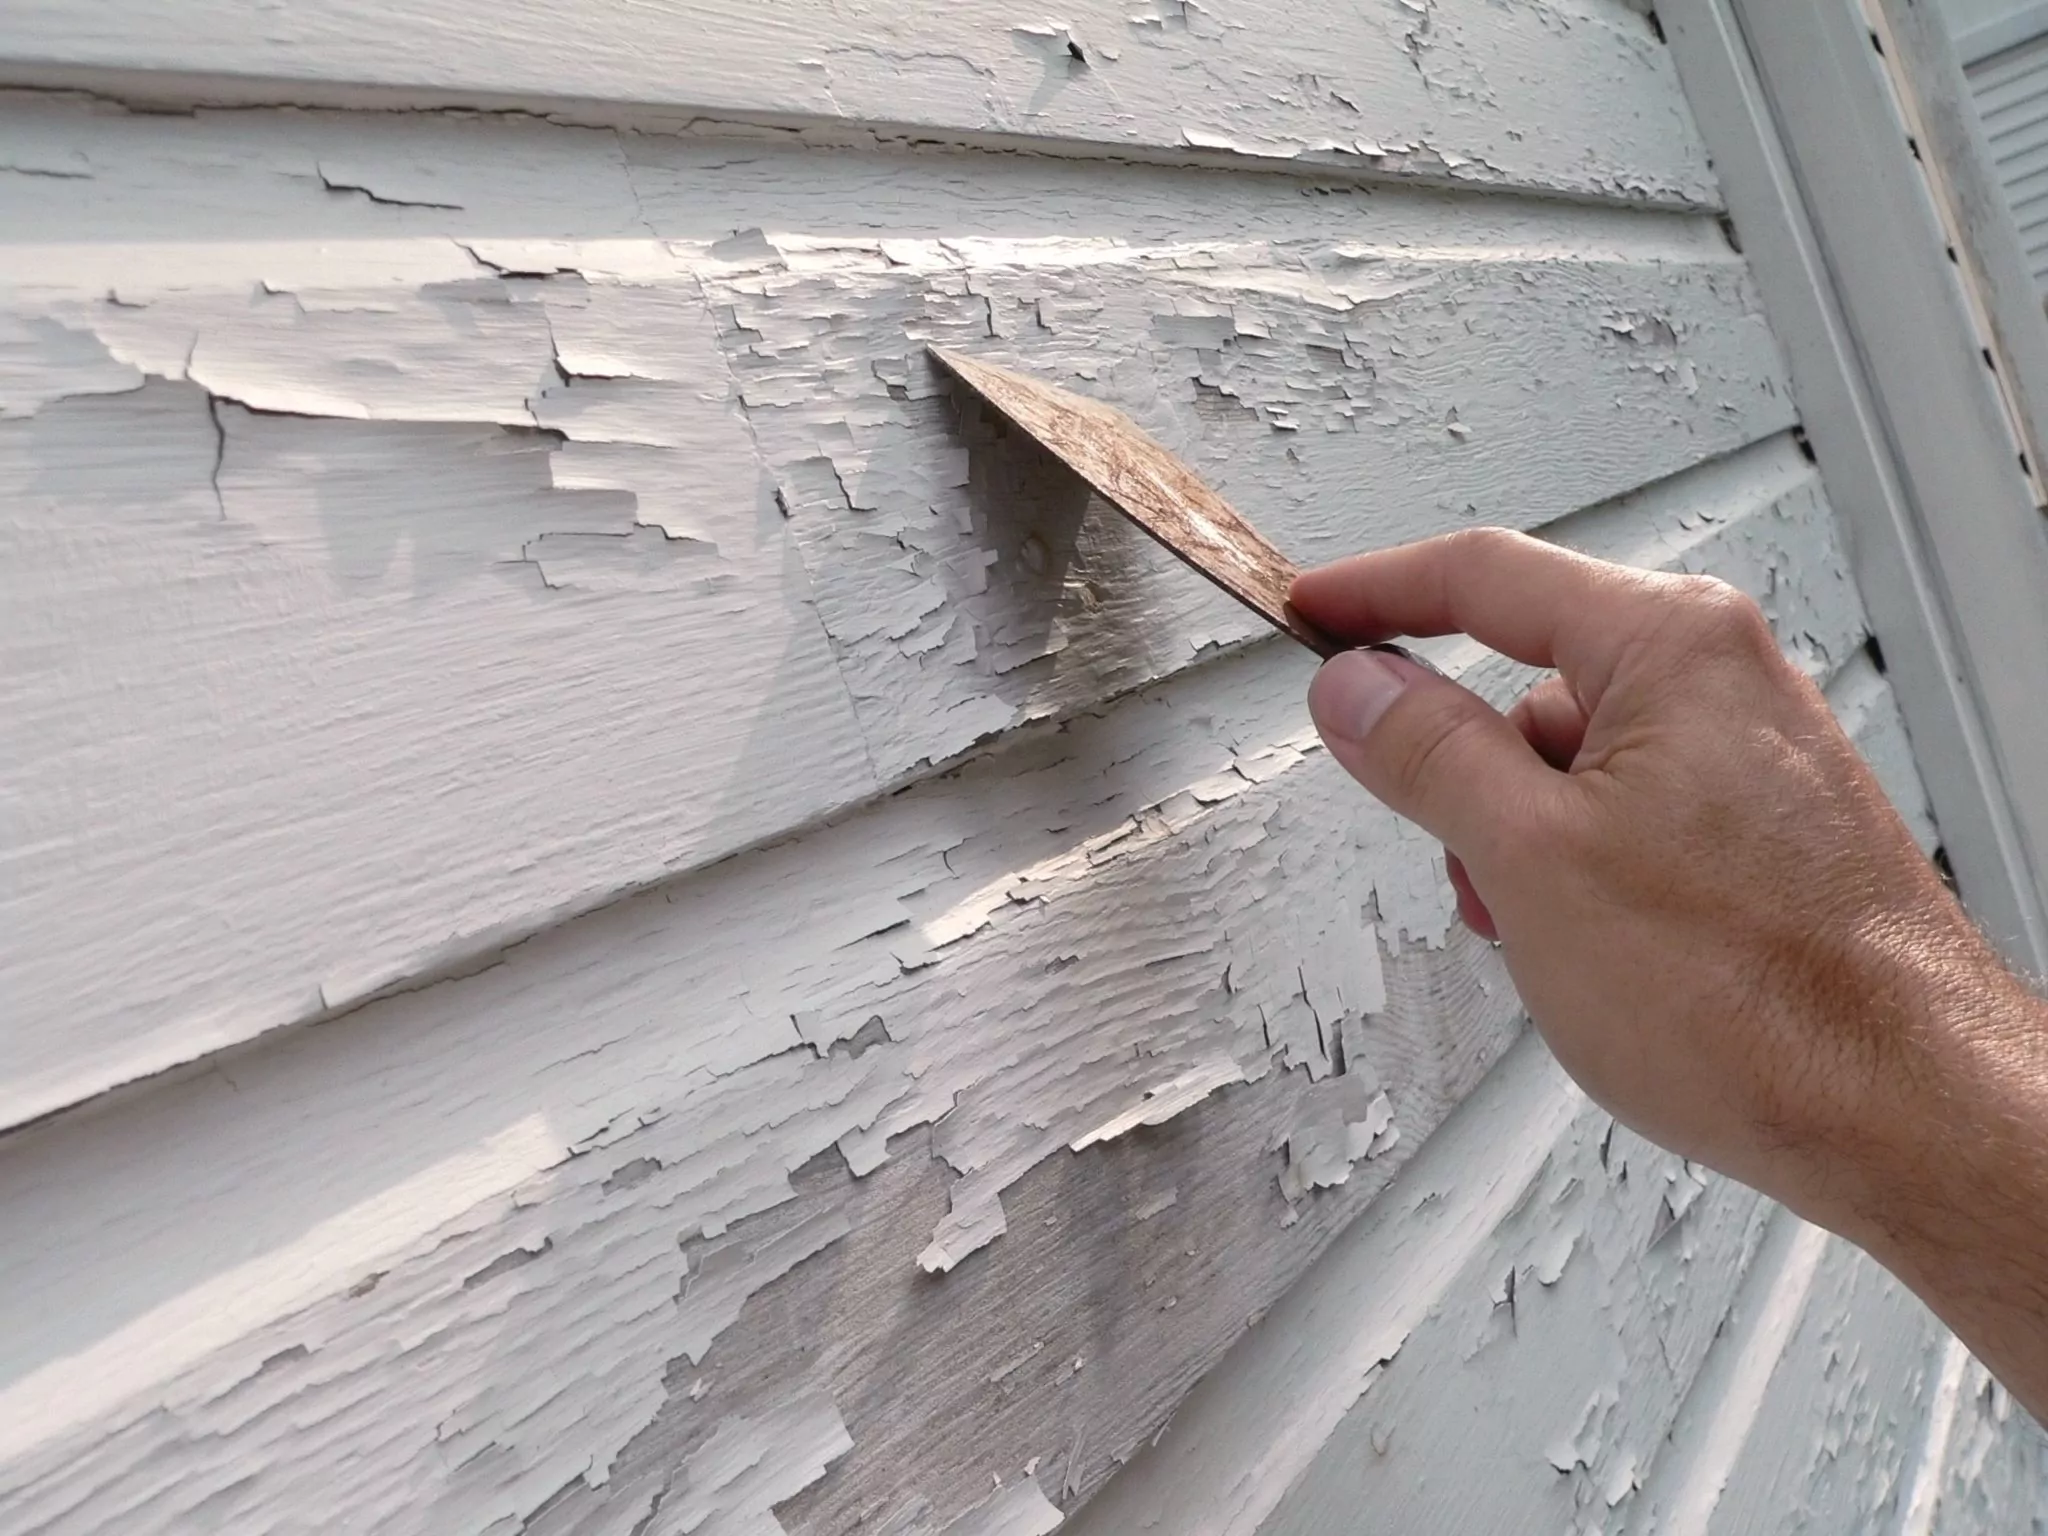 When starting a house painting project, it's important to remove loose paint.